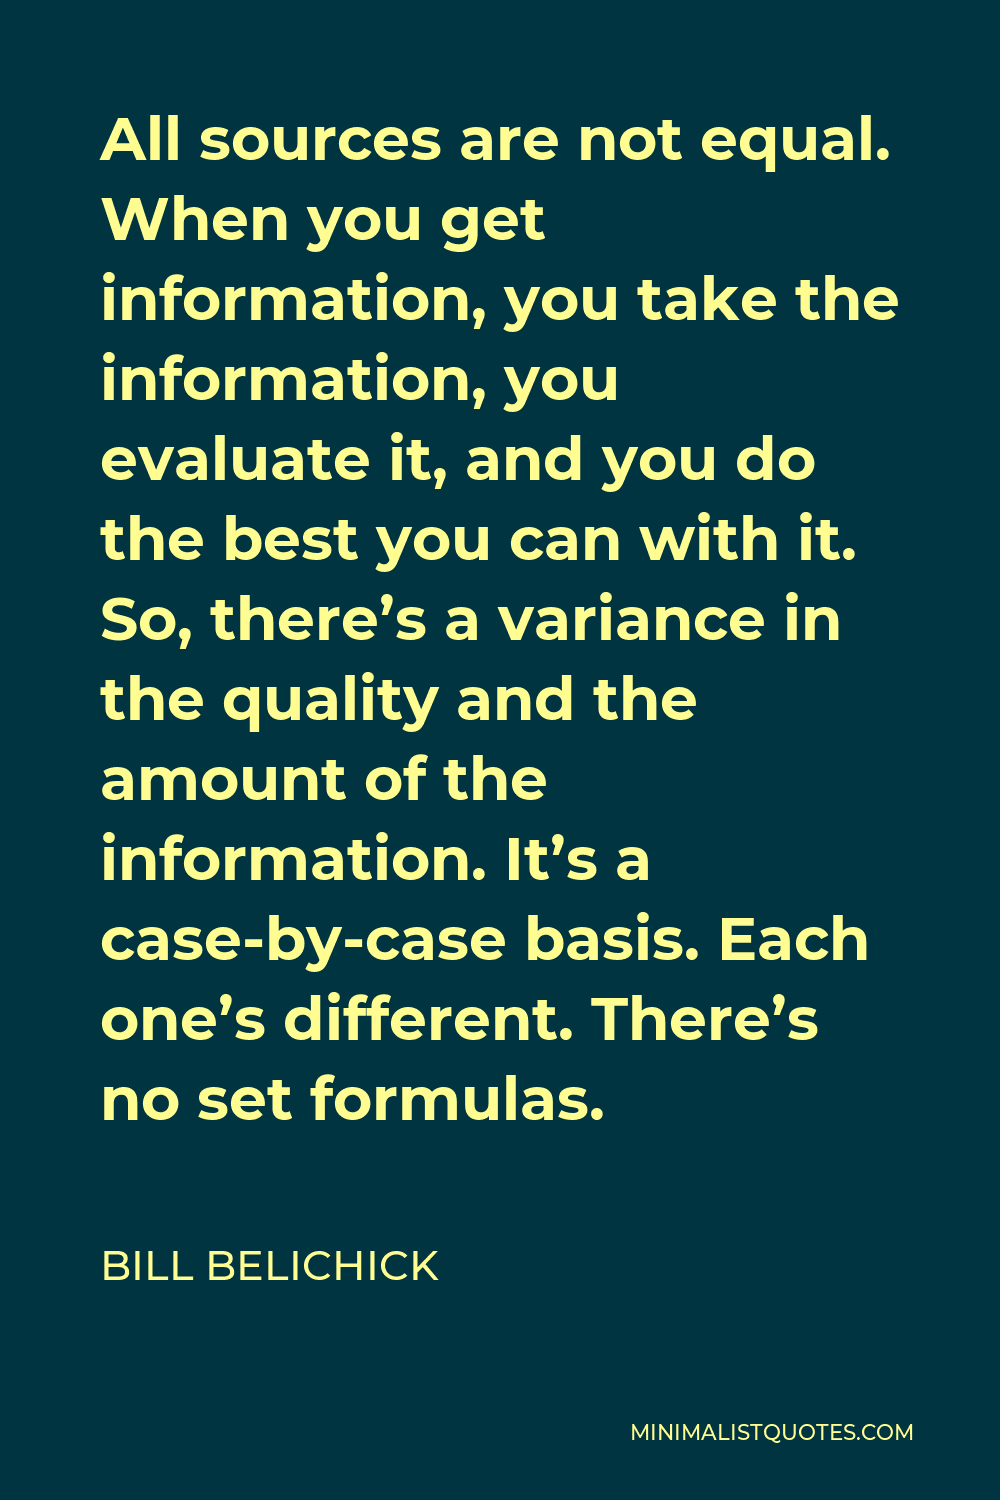 Bill Belichick Quote - All sources are not equal. When you get information, you take the information, you evaluate it, and you do the best you can with it. So, there’s a variance in the quality and the amount of the information. It’s a case-by-case basis. Each one’s different. There’s no set formulas.